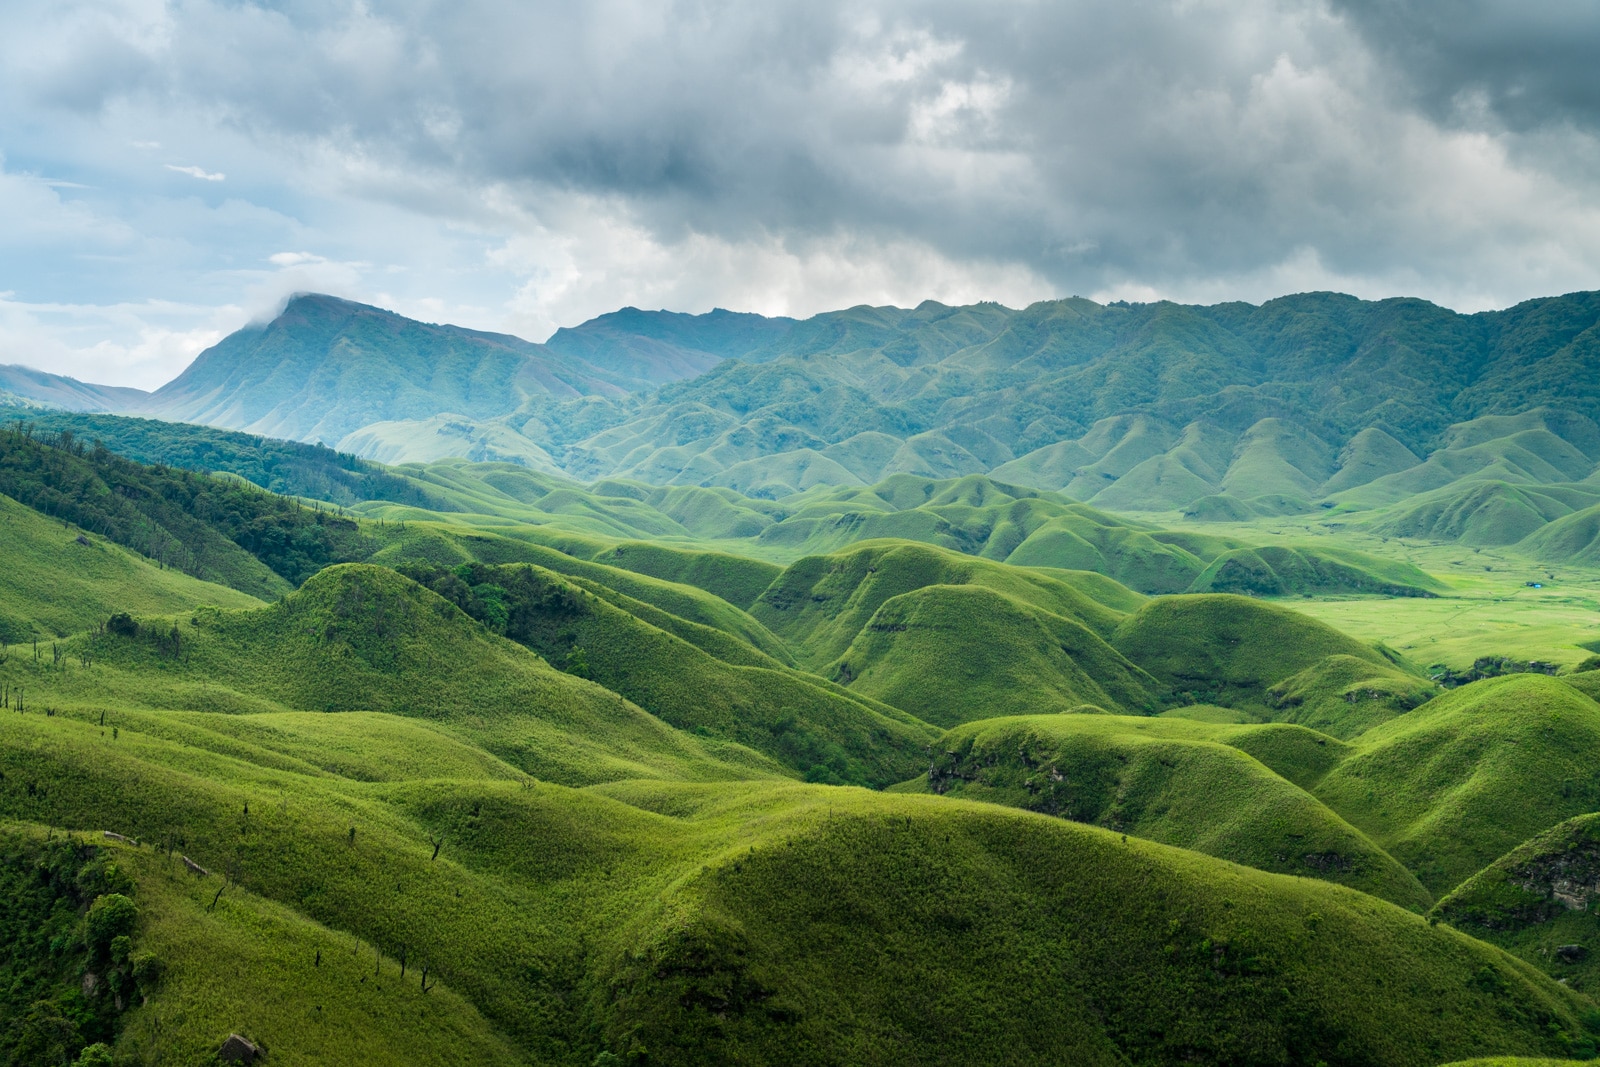 The green carpeted hills of Dzukou Valley